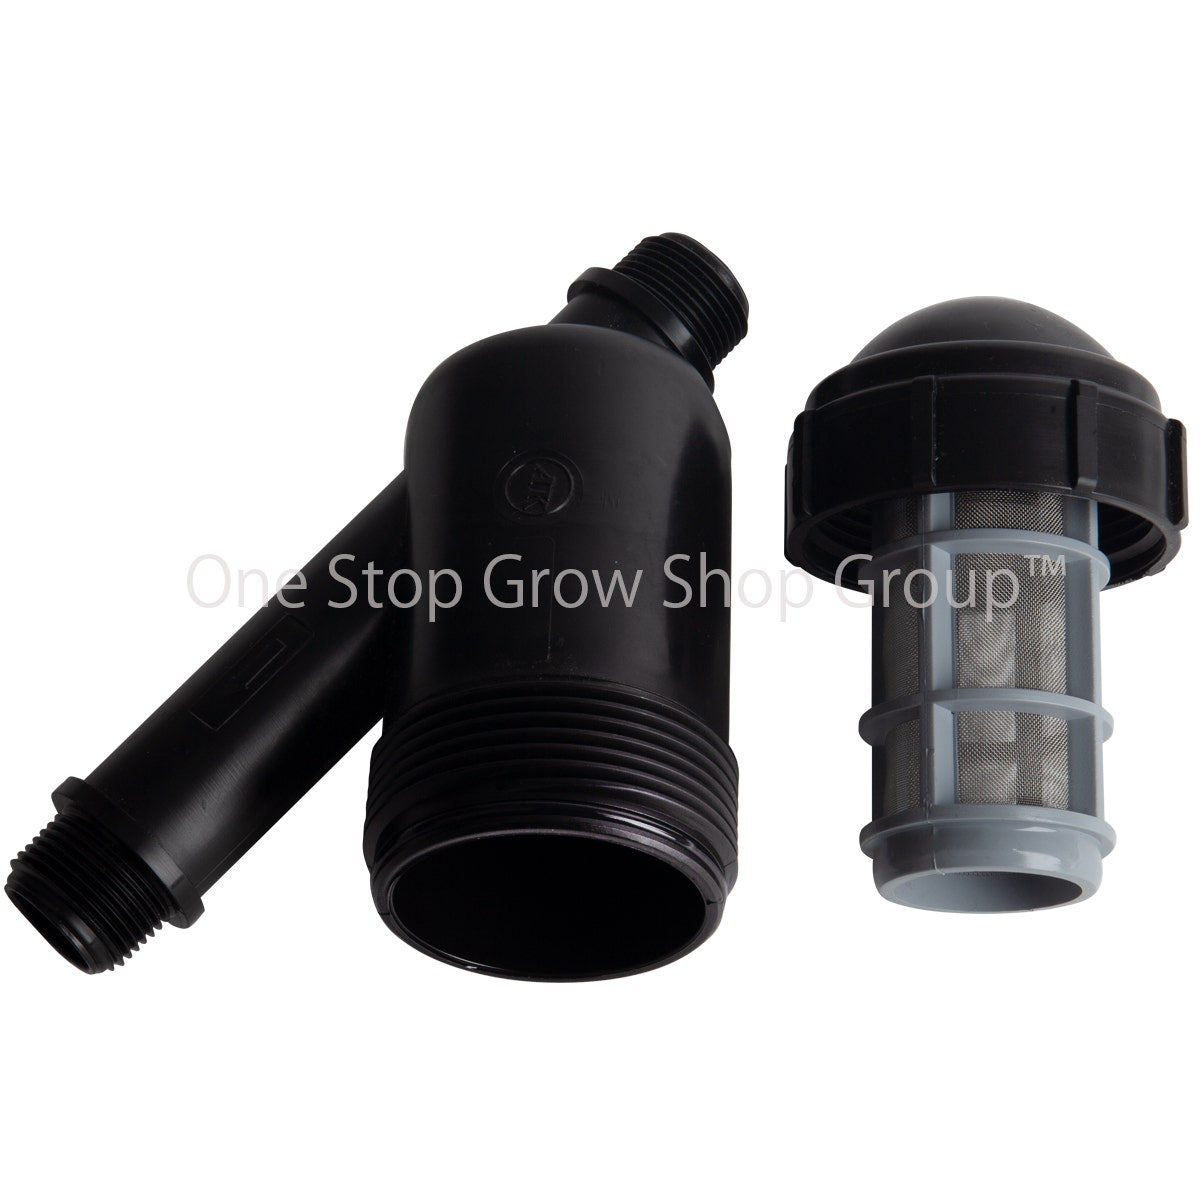 25mm Barbed Irrigation Fittings